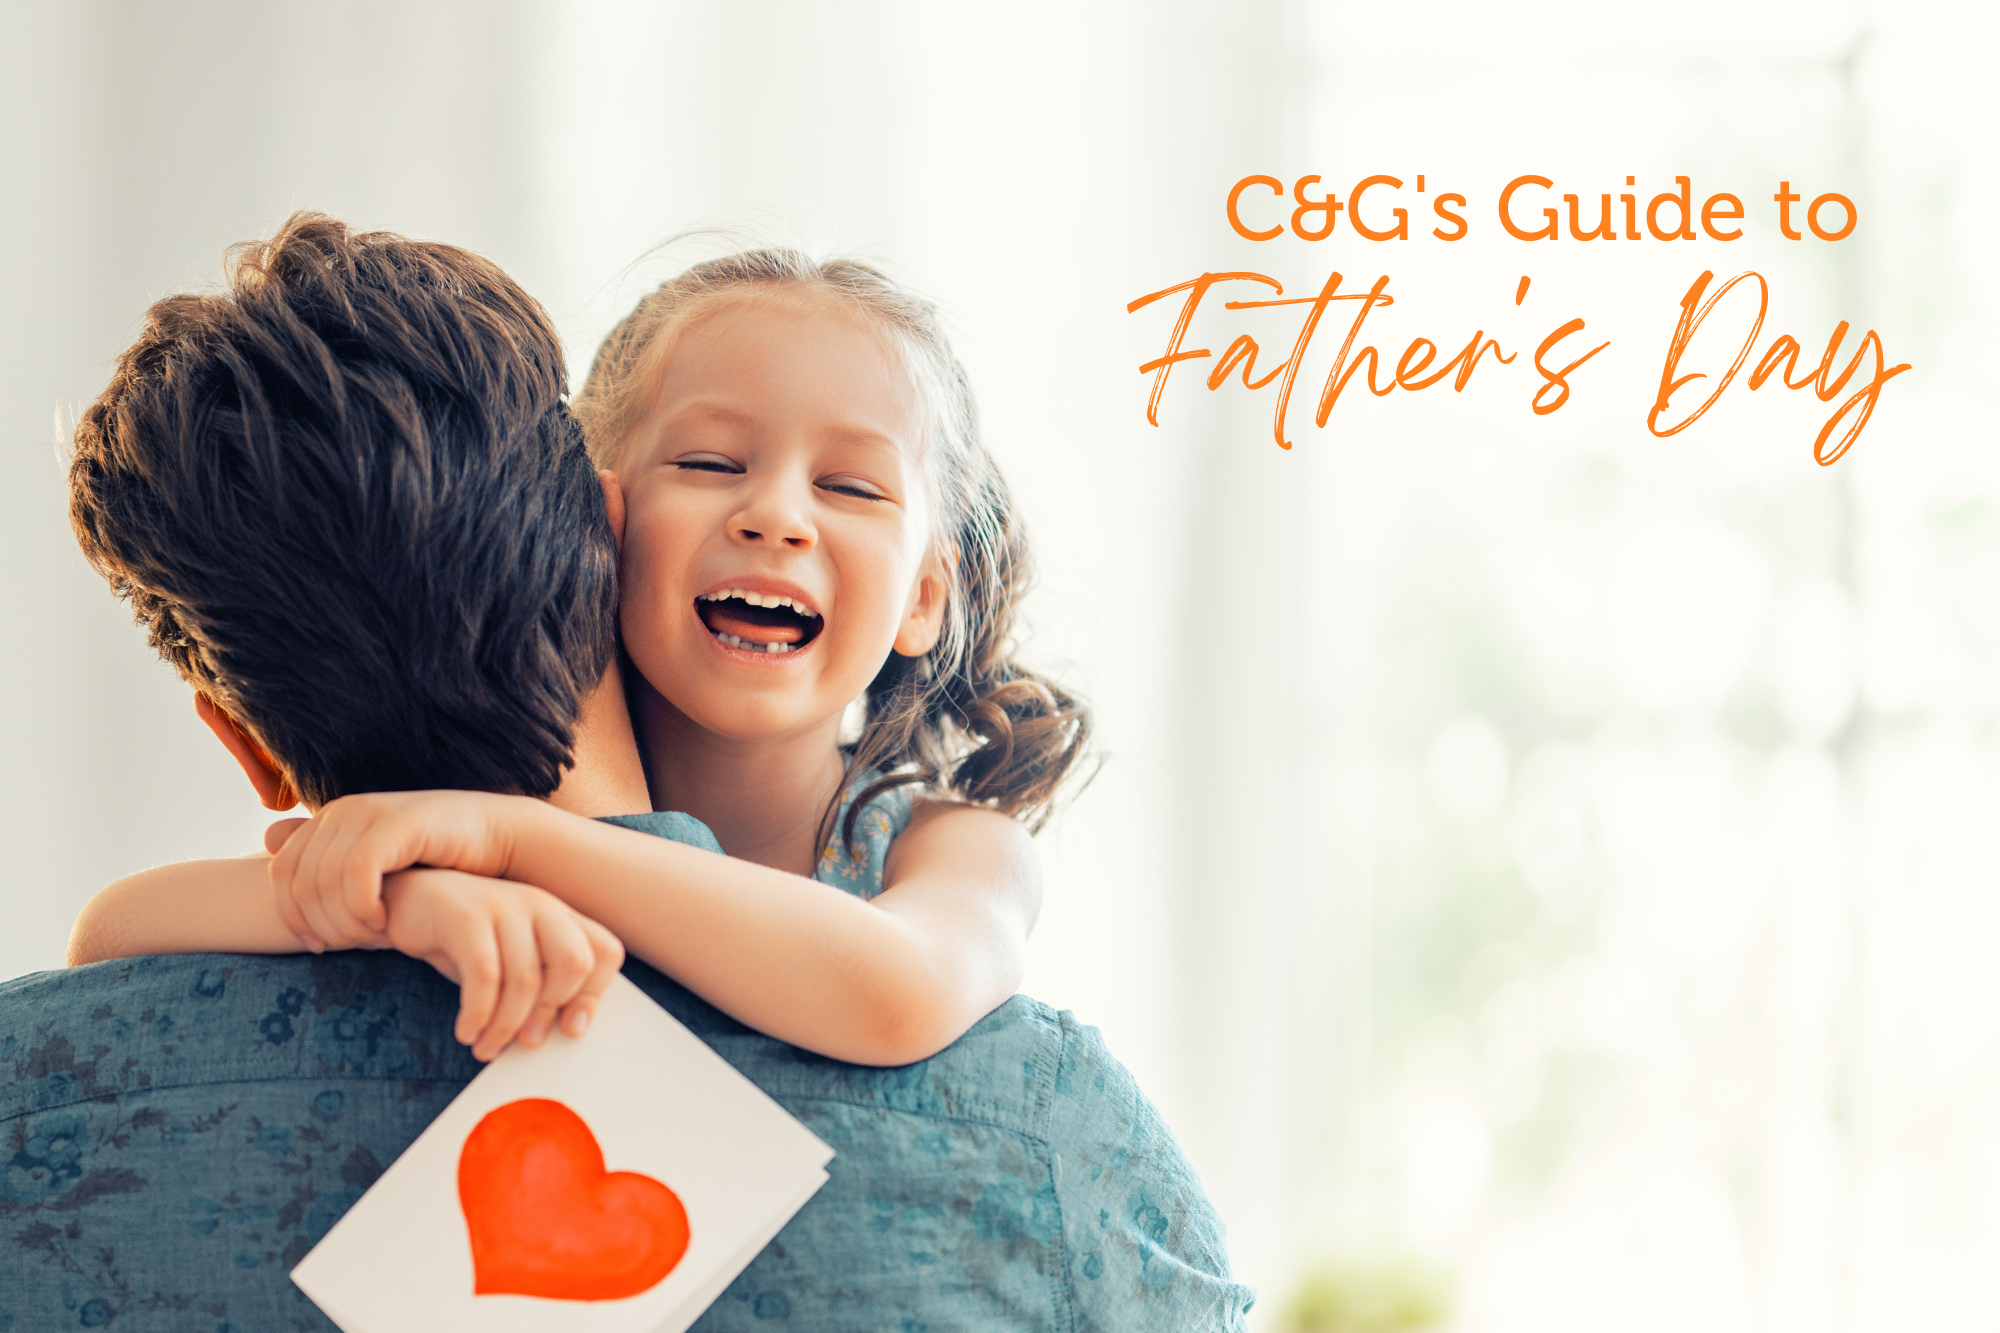 C&G's Guide to Father’s Day